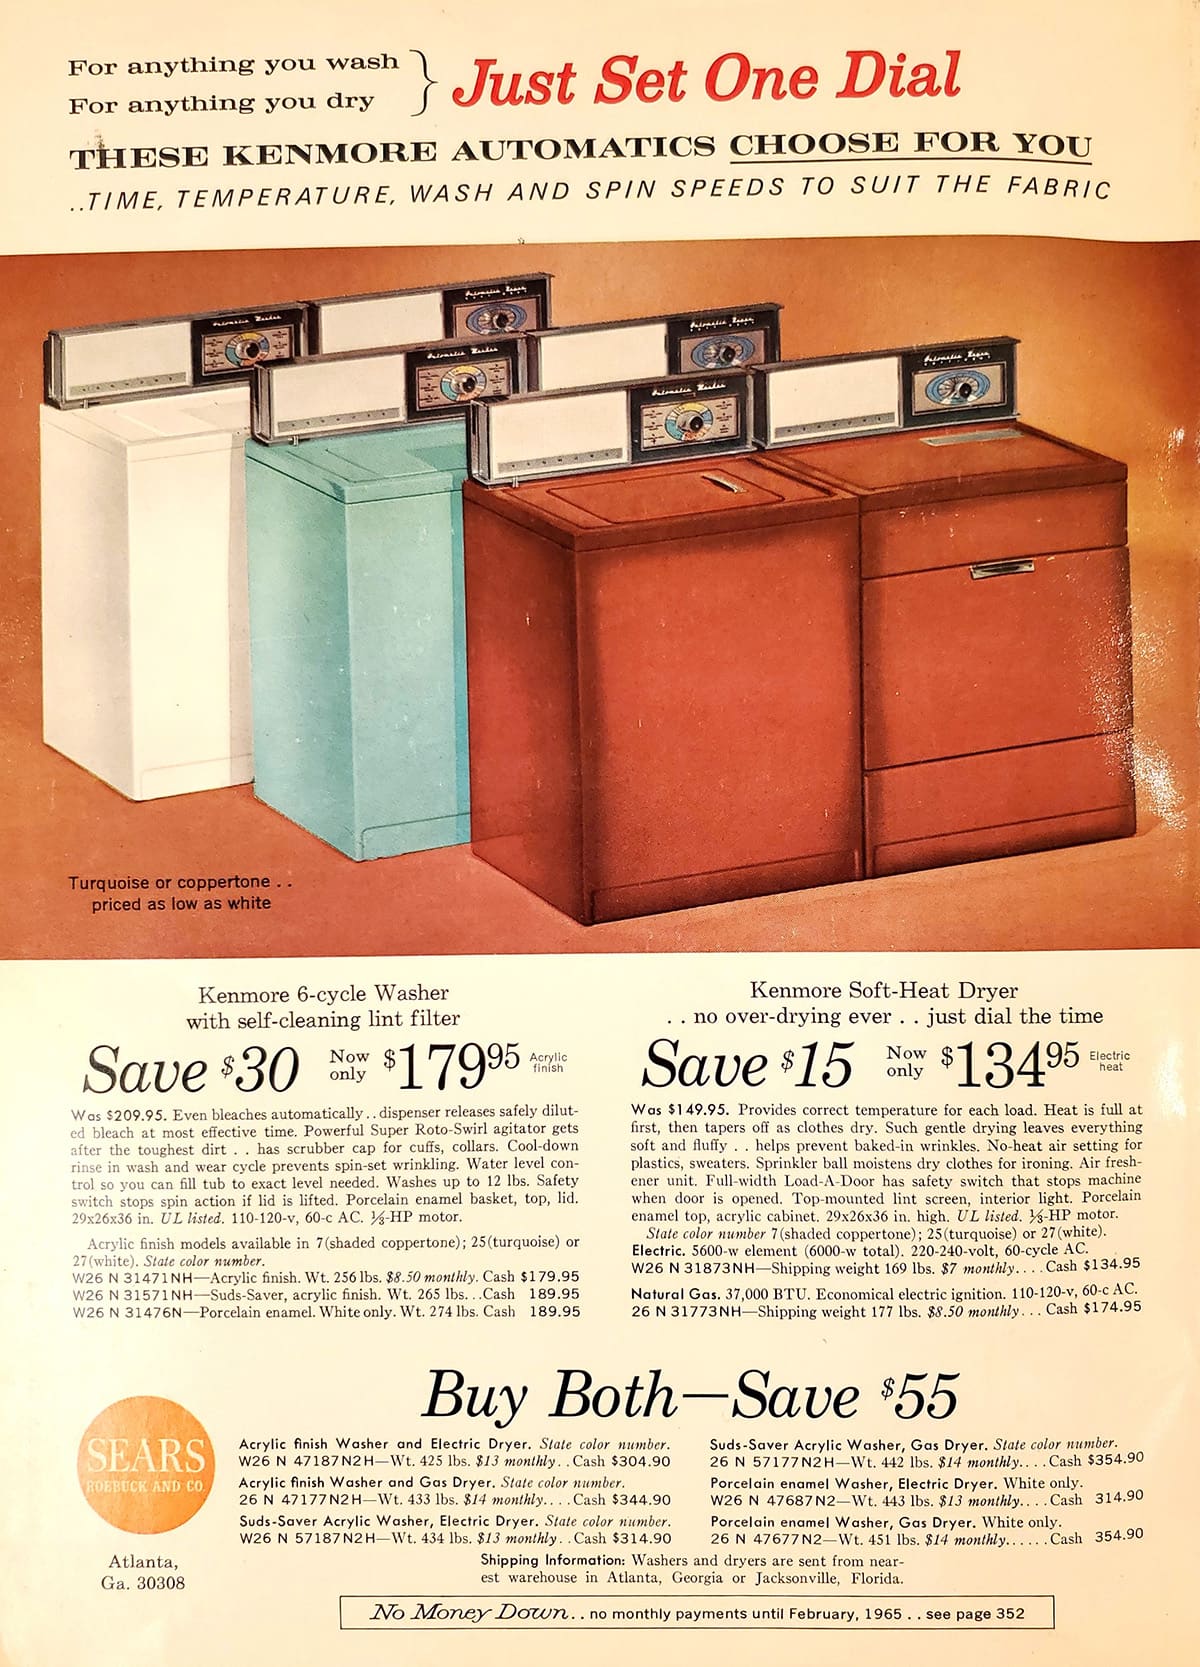 An advertisement for Kenmore washers and dryers from 1965